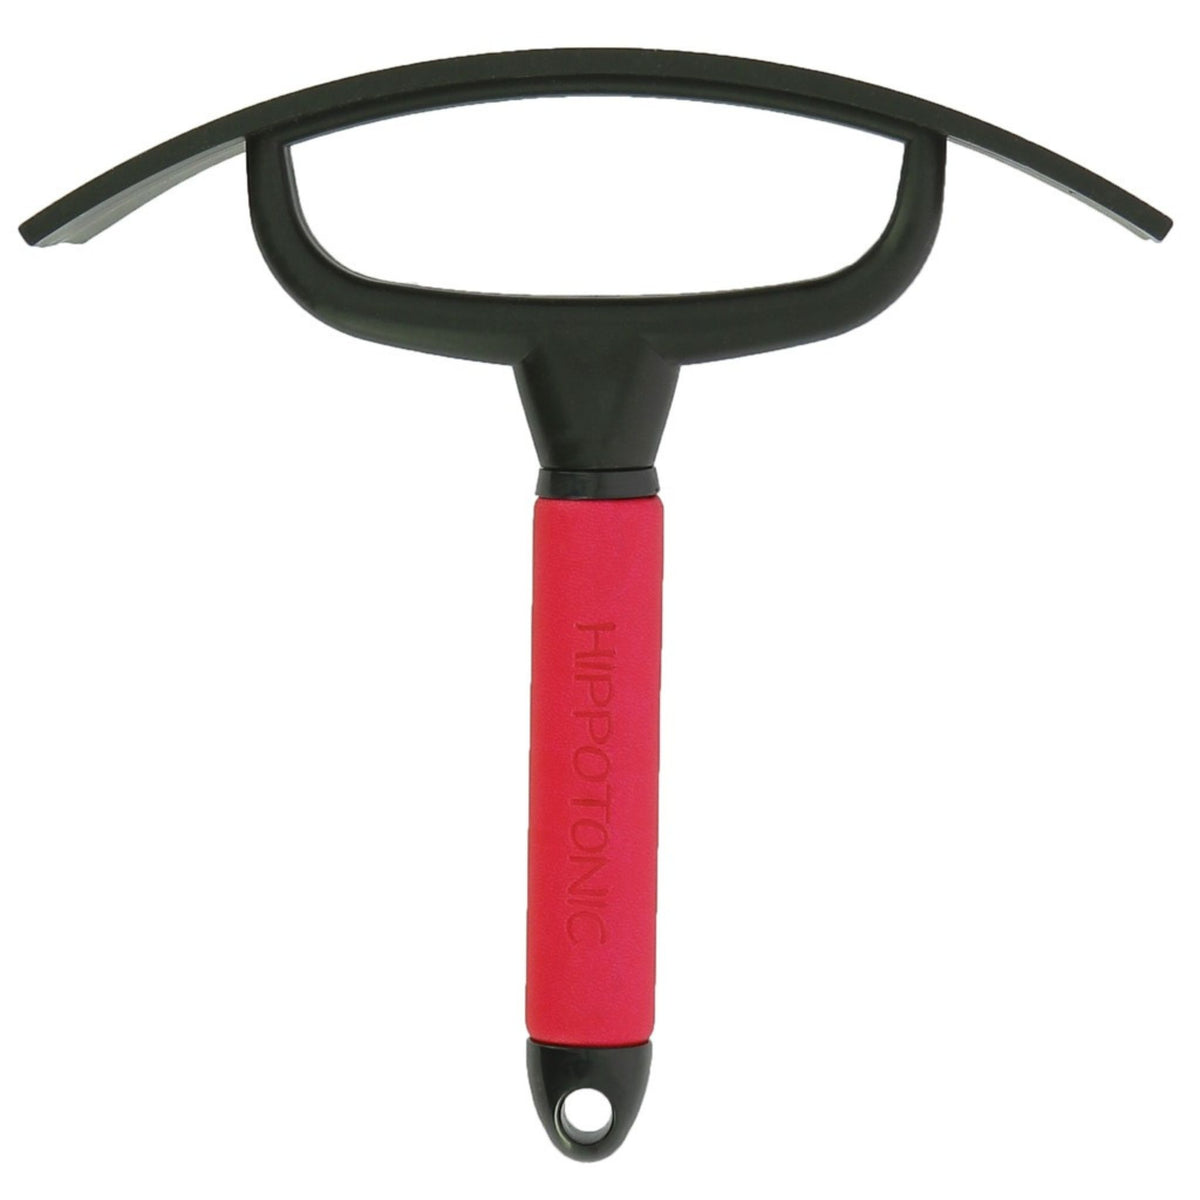 Black sweat scraper with a pink leather handle indented with “Hippotonic”.